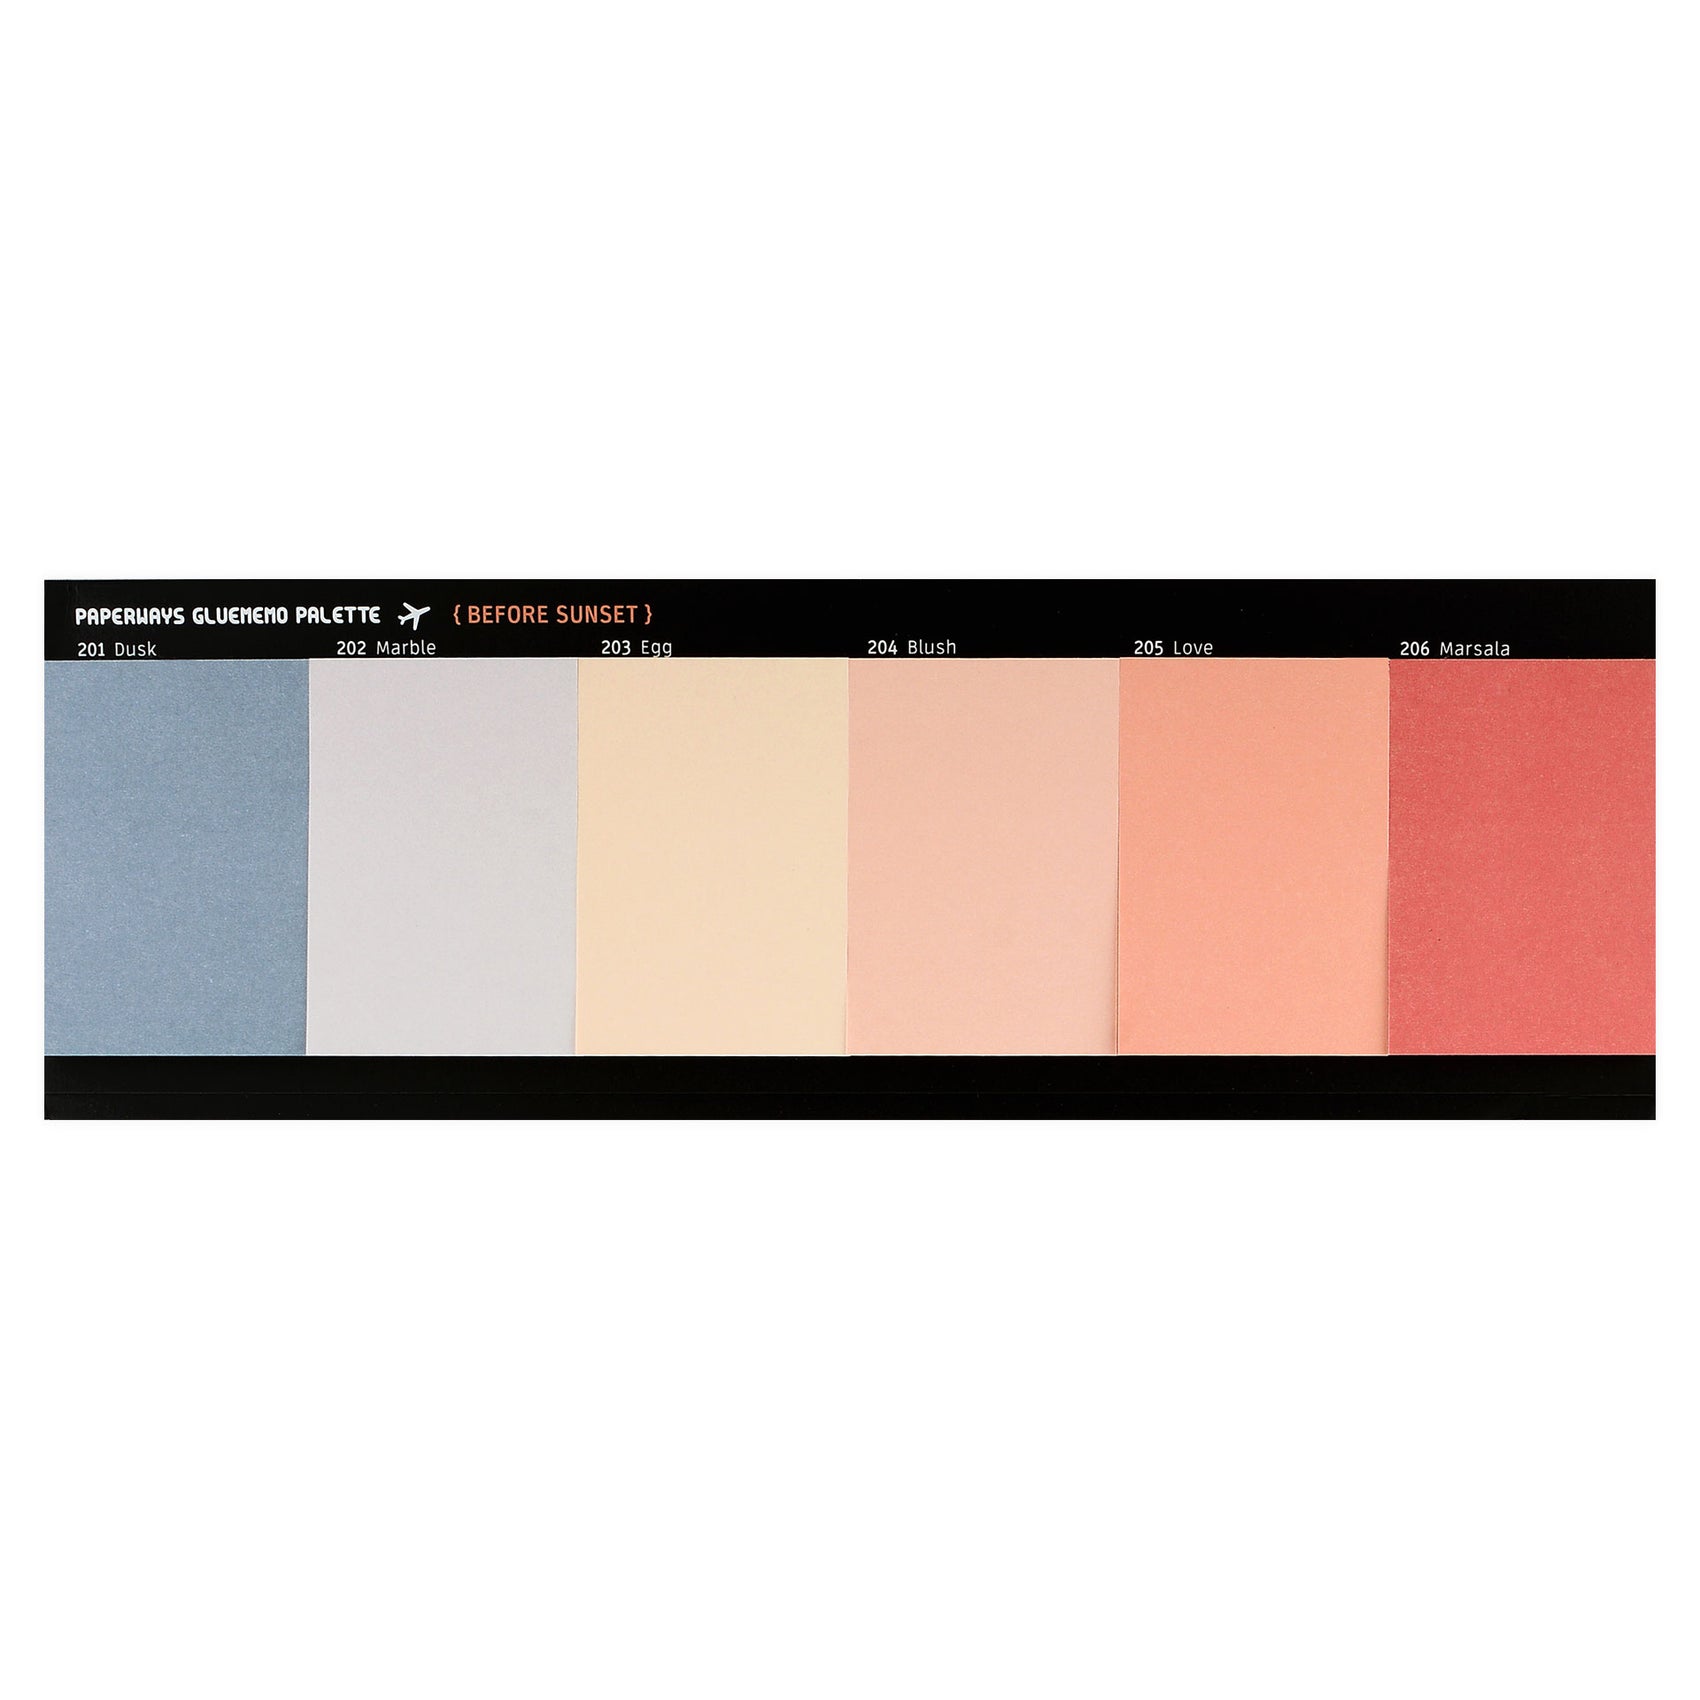 Paperways Gluememo Palette Sticky Notes Before Sunset